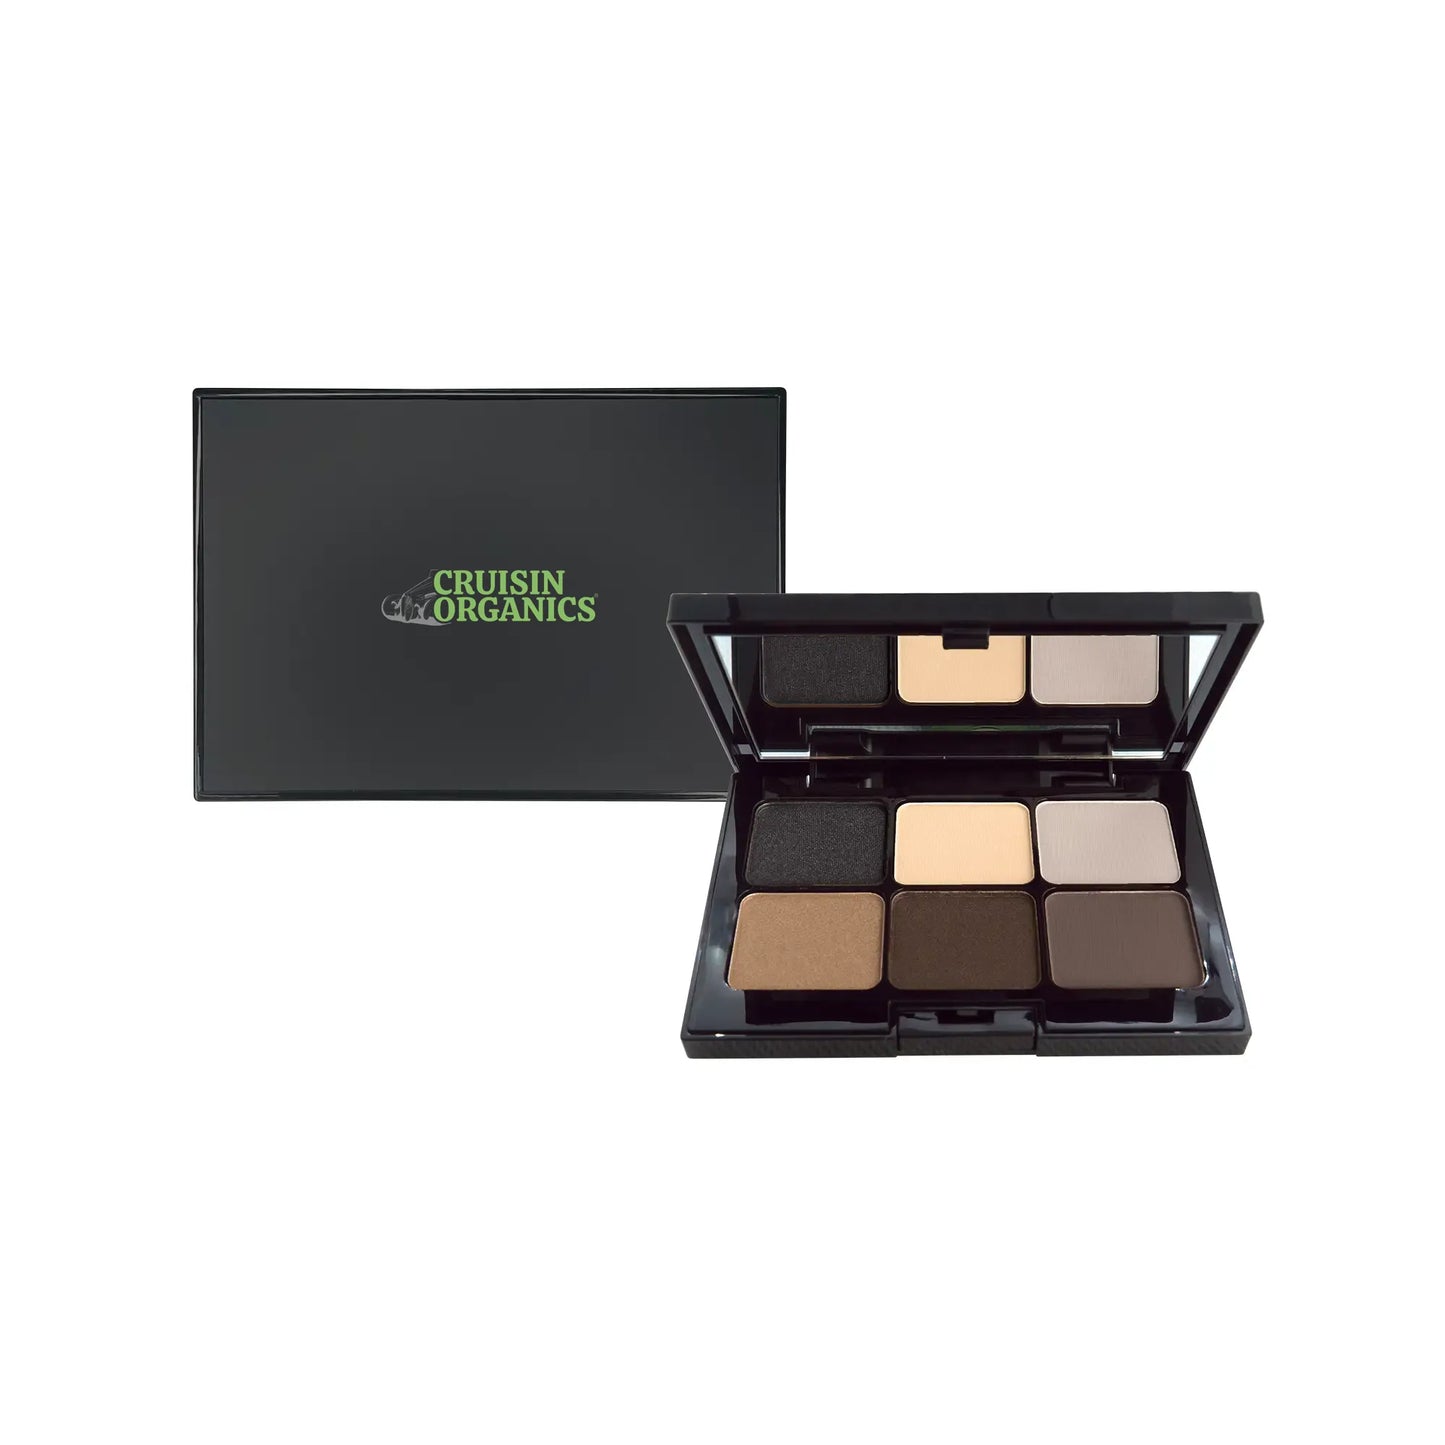 Dark Storm Eyeshadow Palette from Cruisin Organics. This mini 6-shade palette offers a blendable and layerable texture for intense, luminous shades. Our highly pigmented formula stays put with a soft, shimmering or matte finish. Plus, the gentle application won't damage delicate eye skin.